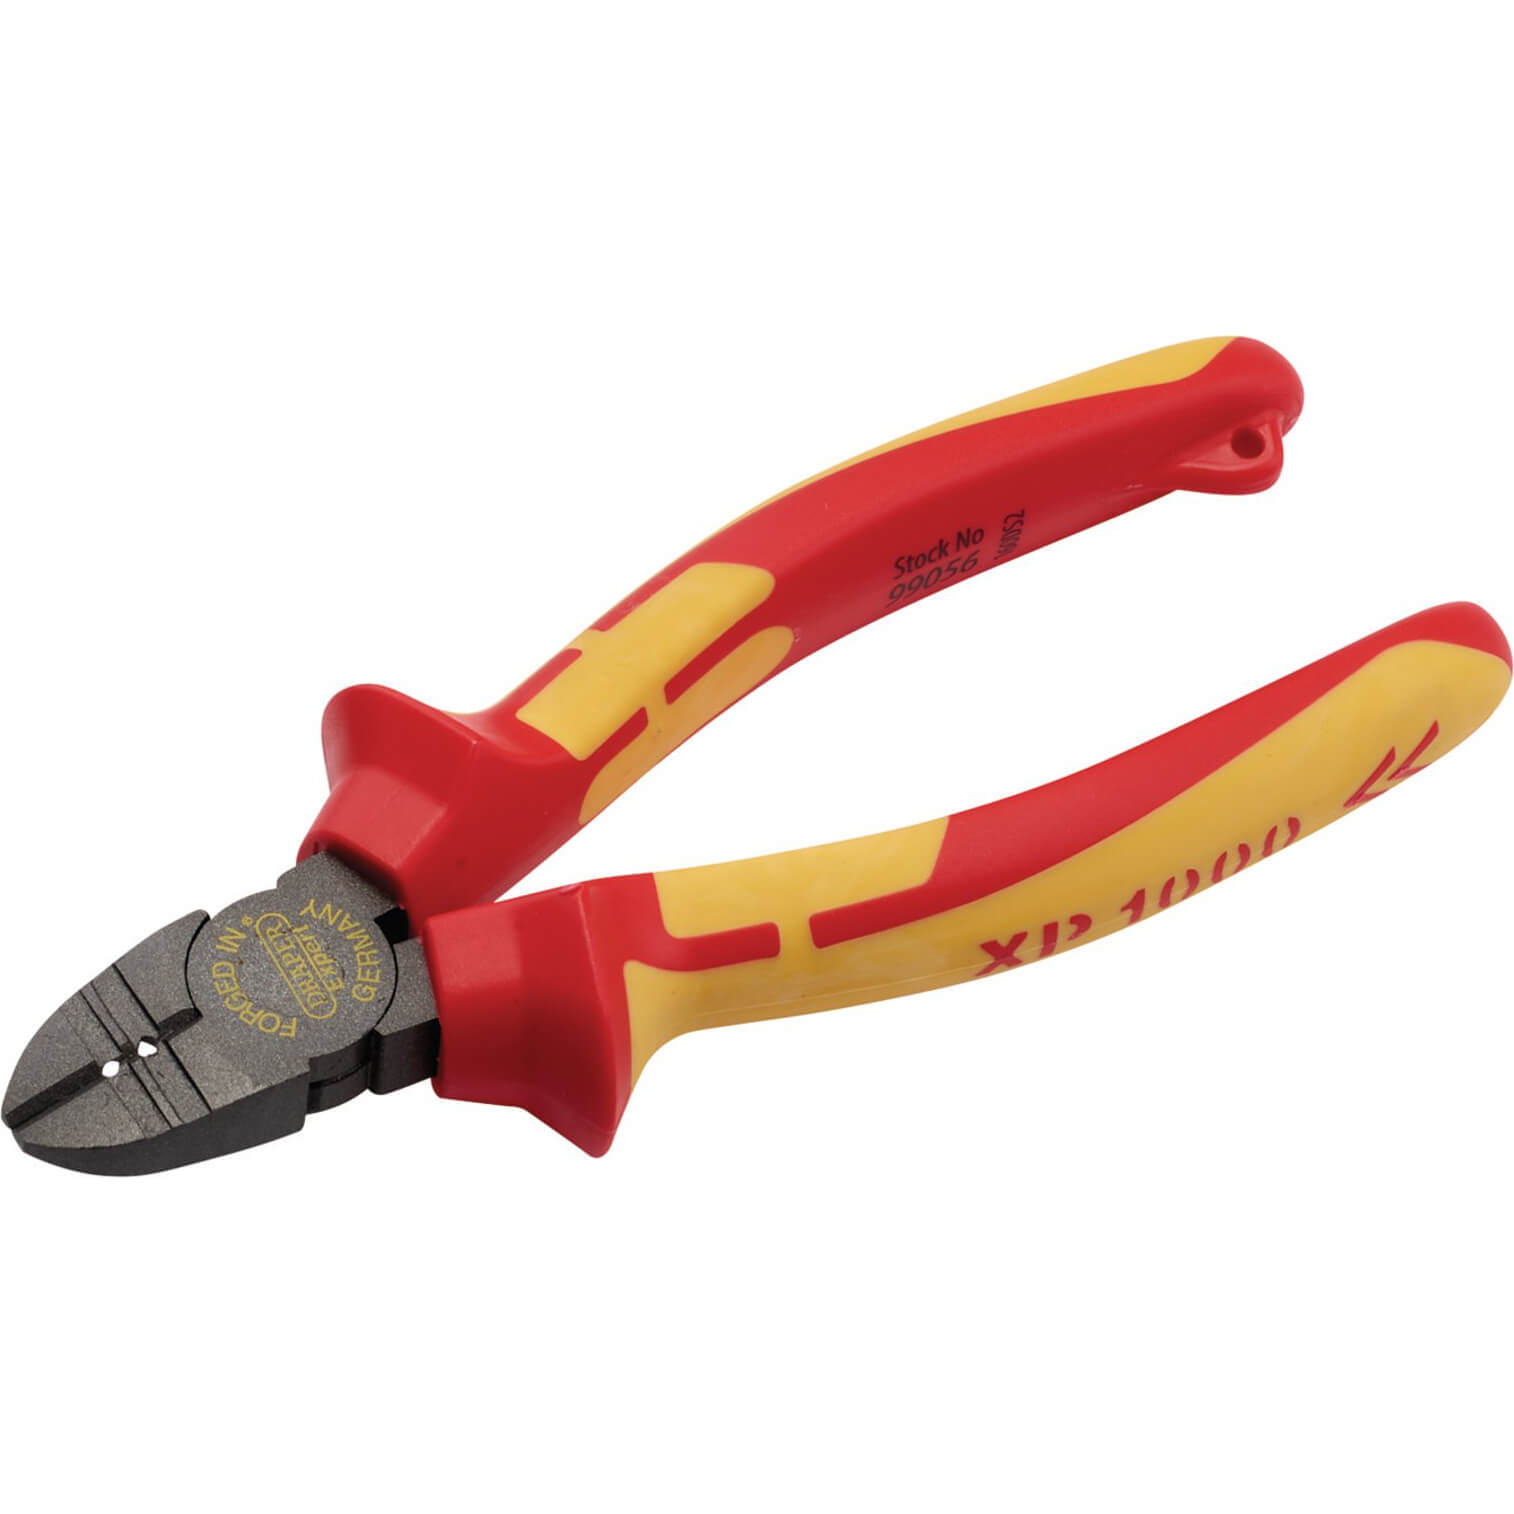 Draper XP1000 VDE Tethered Side Cutter Wire Stripper Pliers 160mm